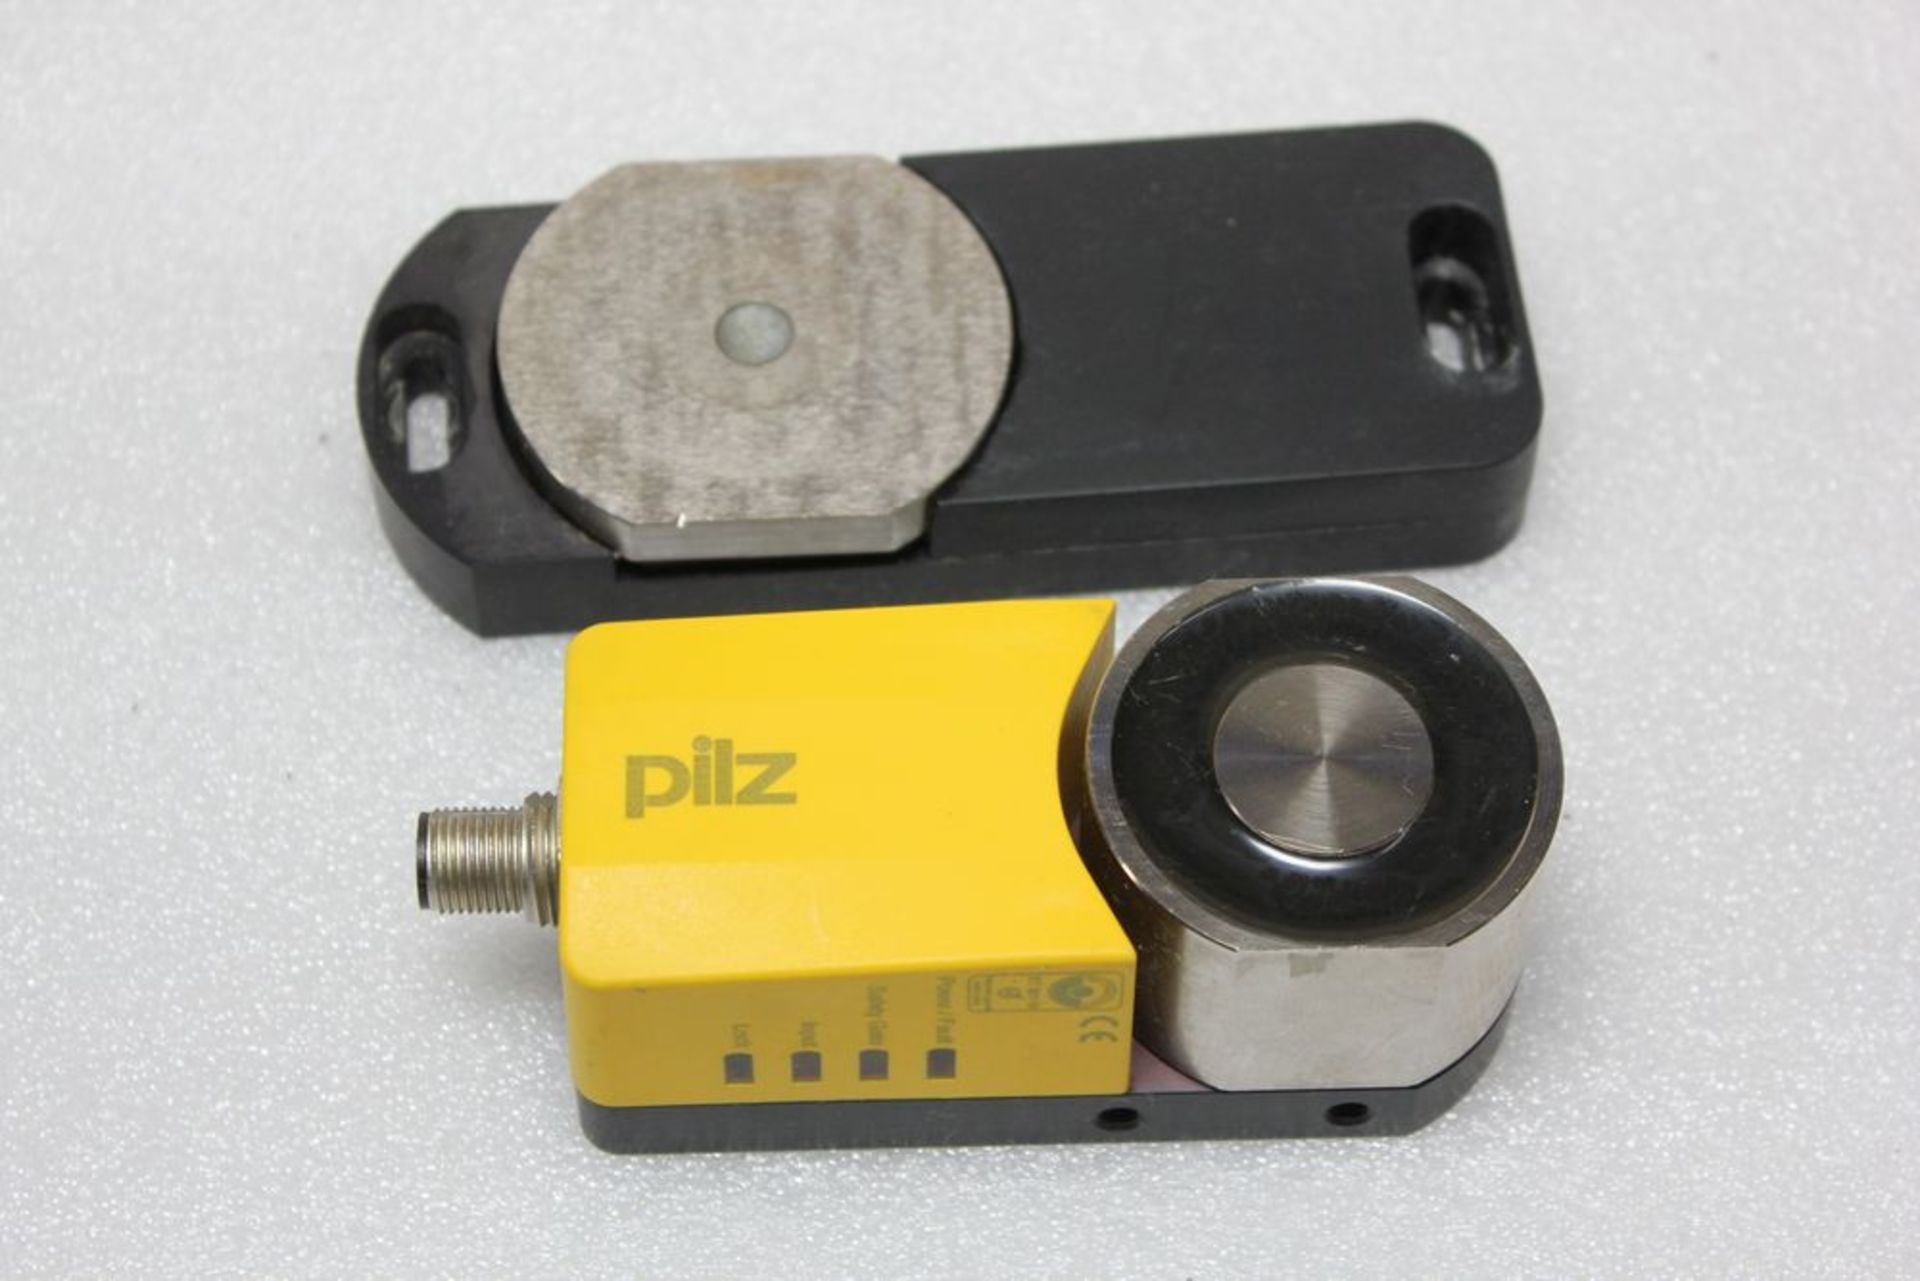 PILZ MAGNETIC SAFETY GATE SYSTEM